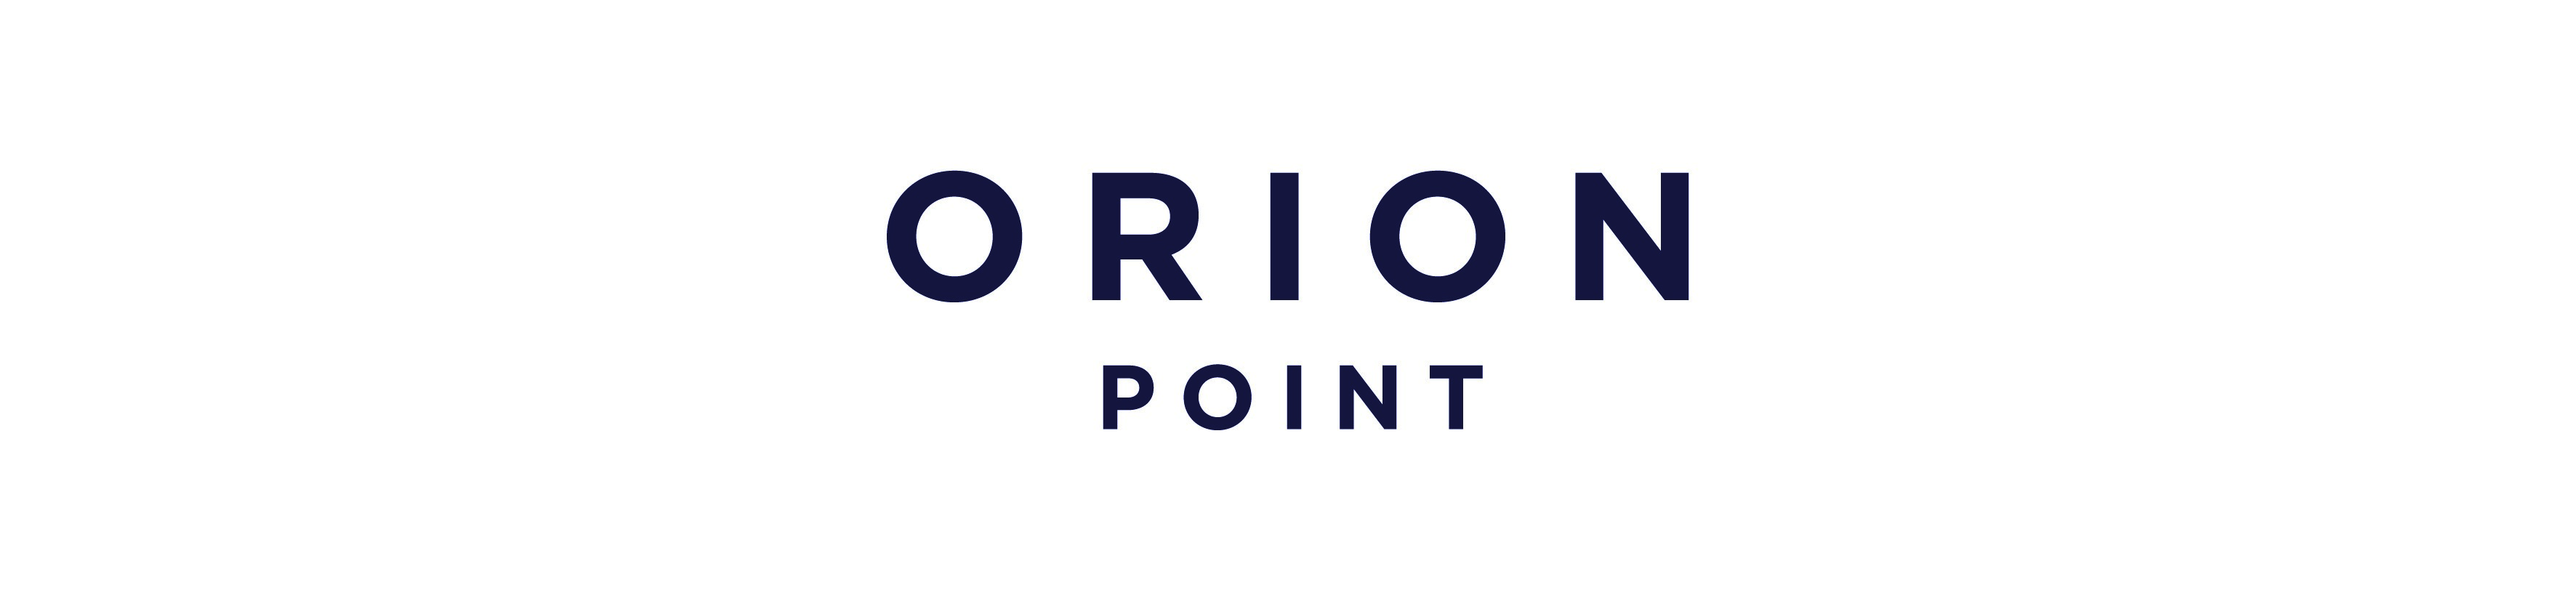 Orion Point - Metlifecare logo